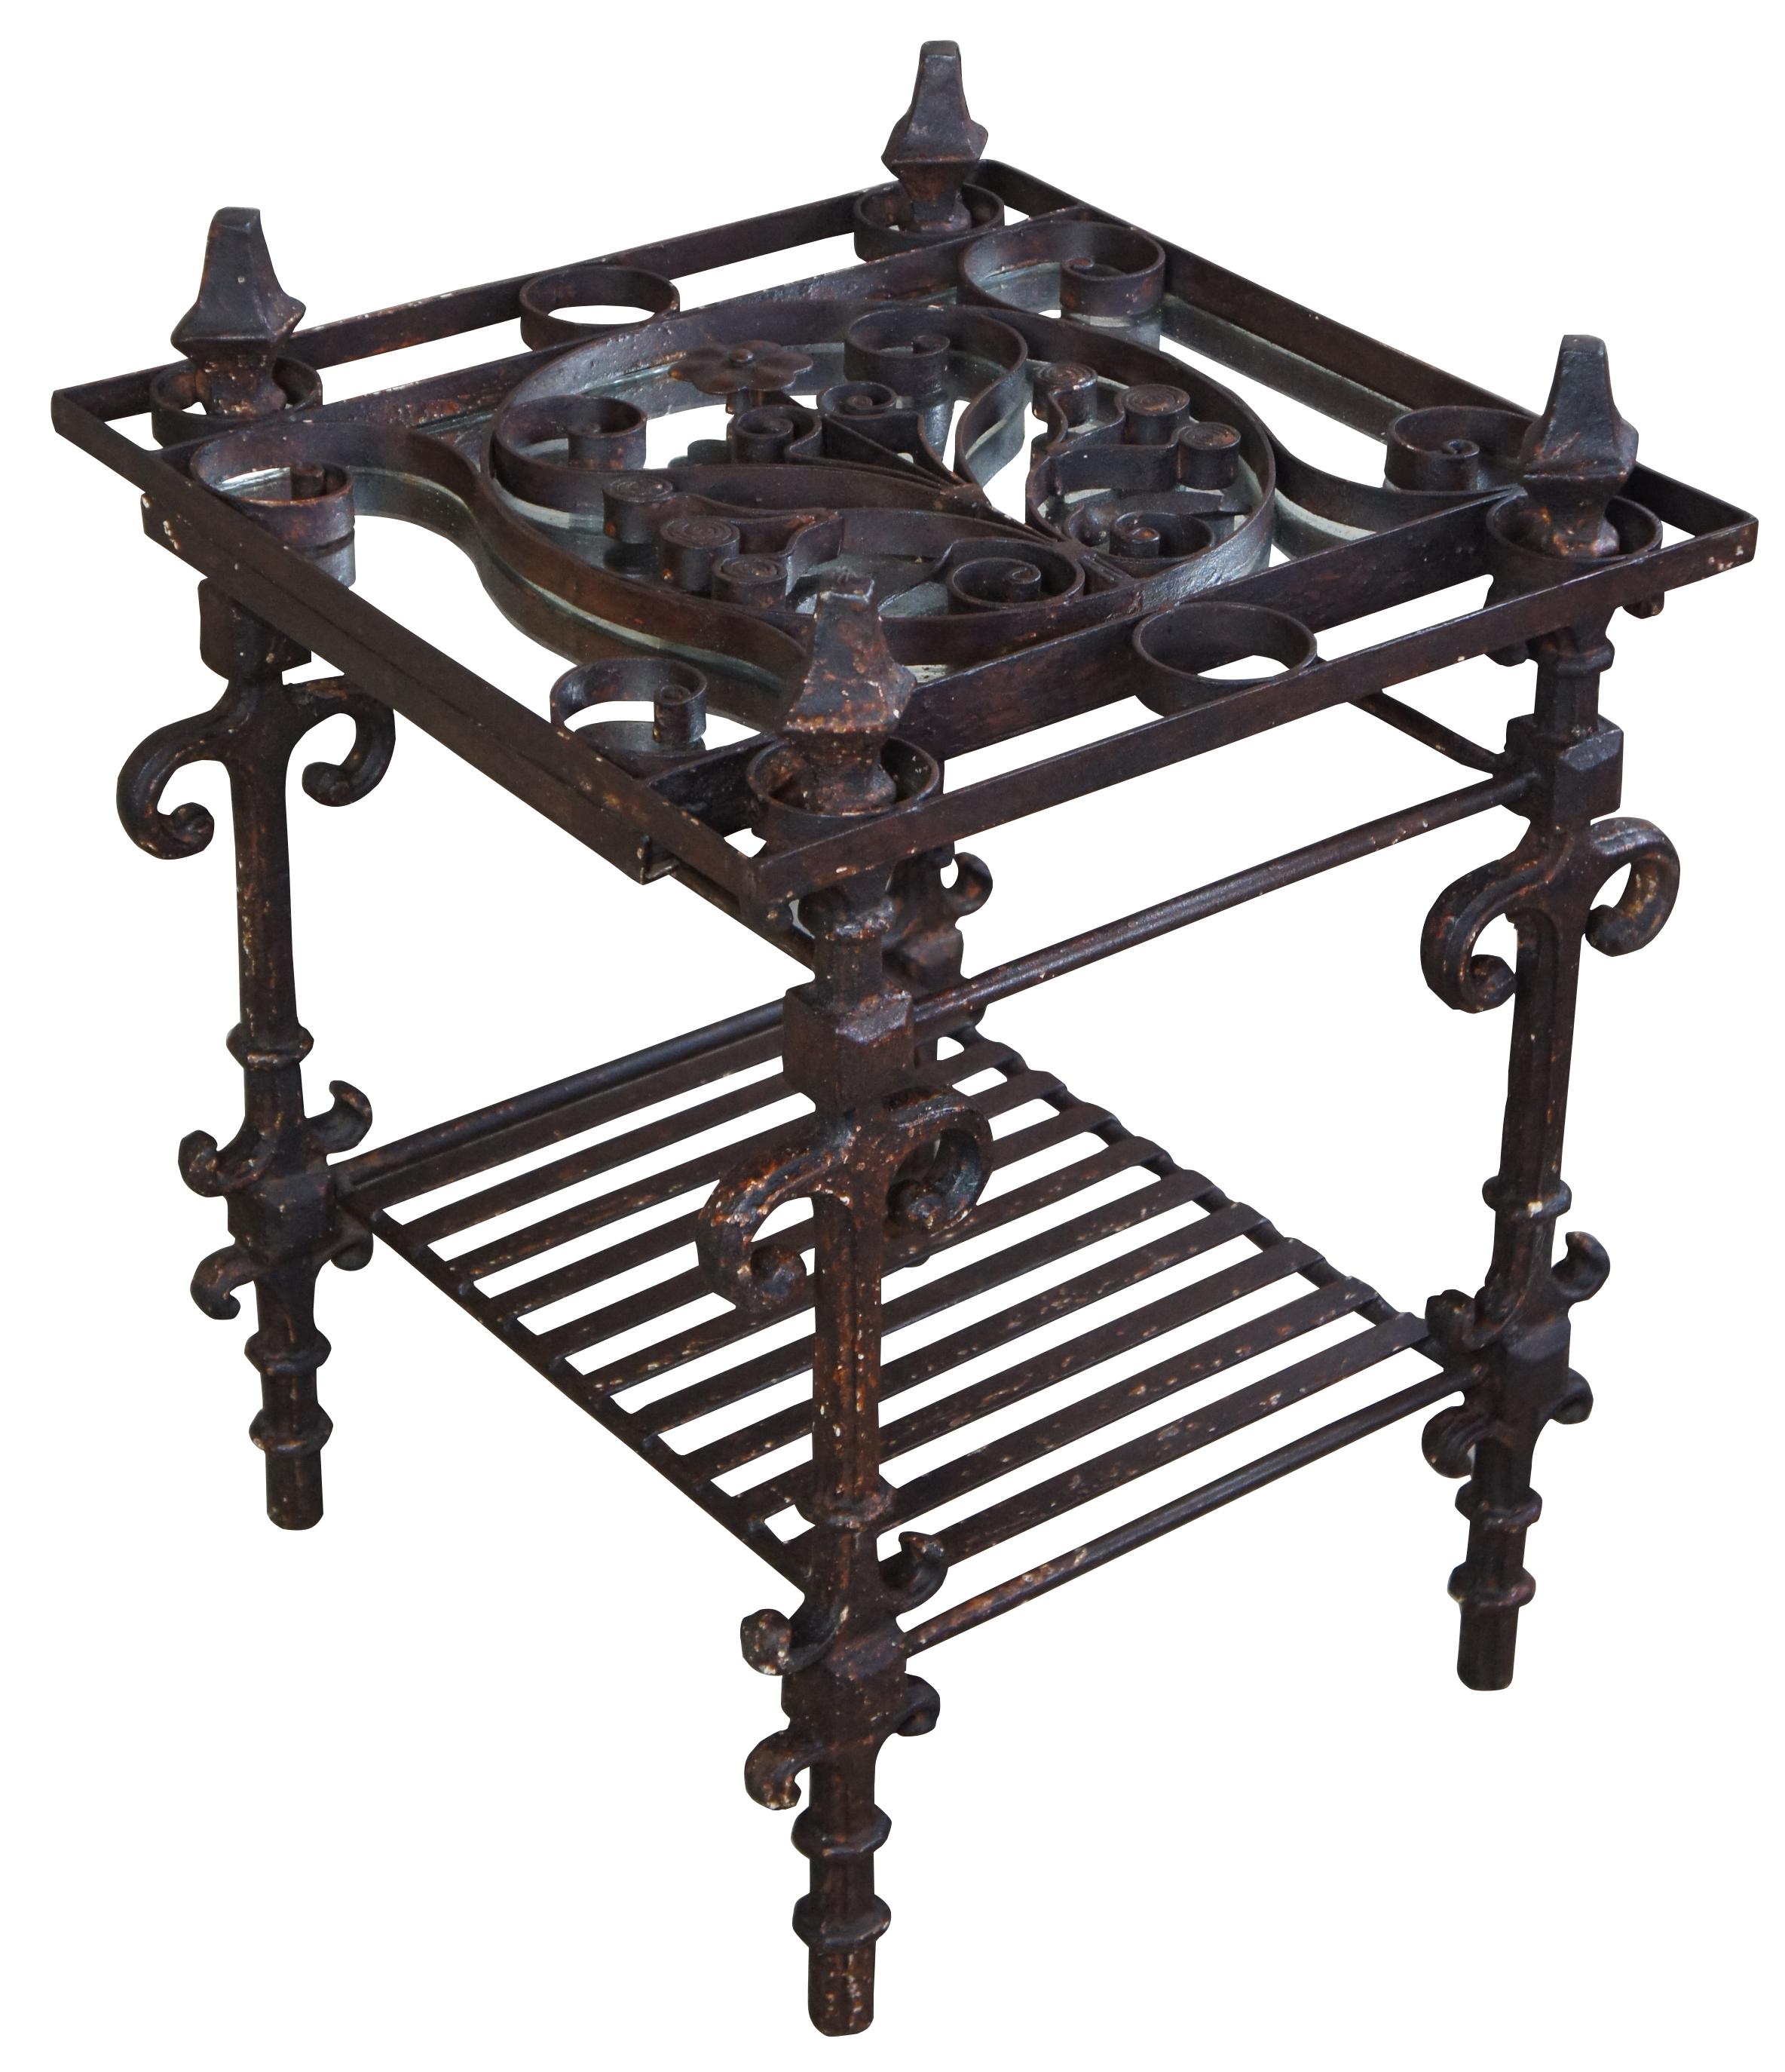 Rustic iron side table by Arhaus Furniture. Features a two-tier design with mirrored top, floral and scrolled accents in a rustic brown finish. Very Heavy.
 